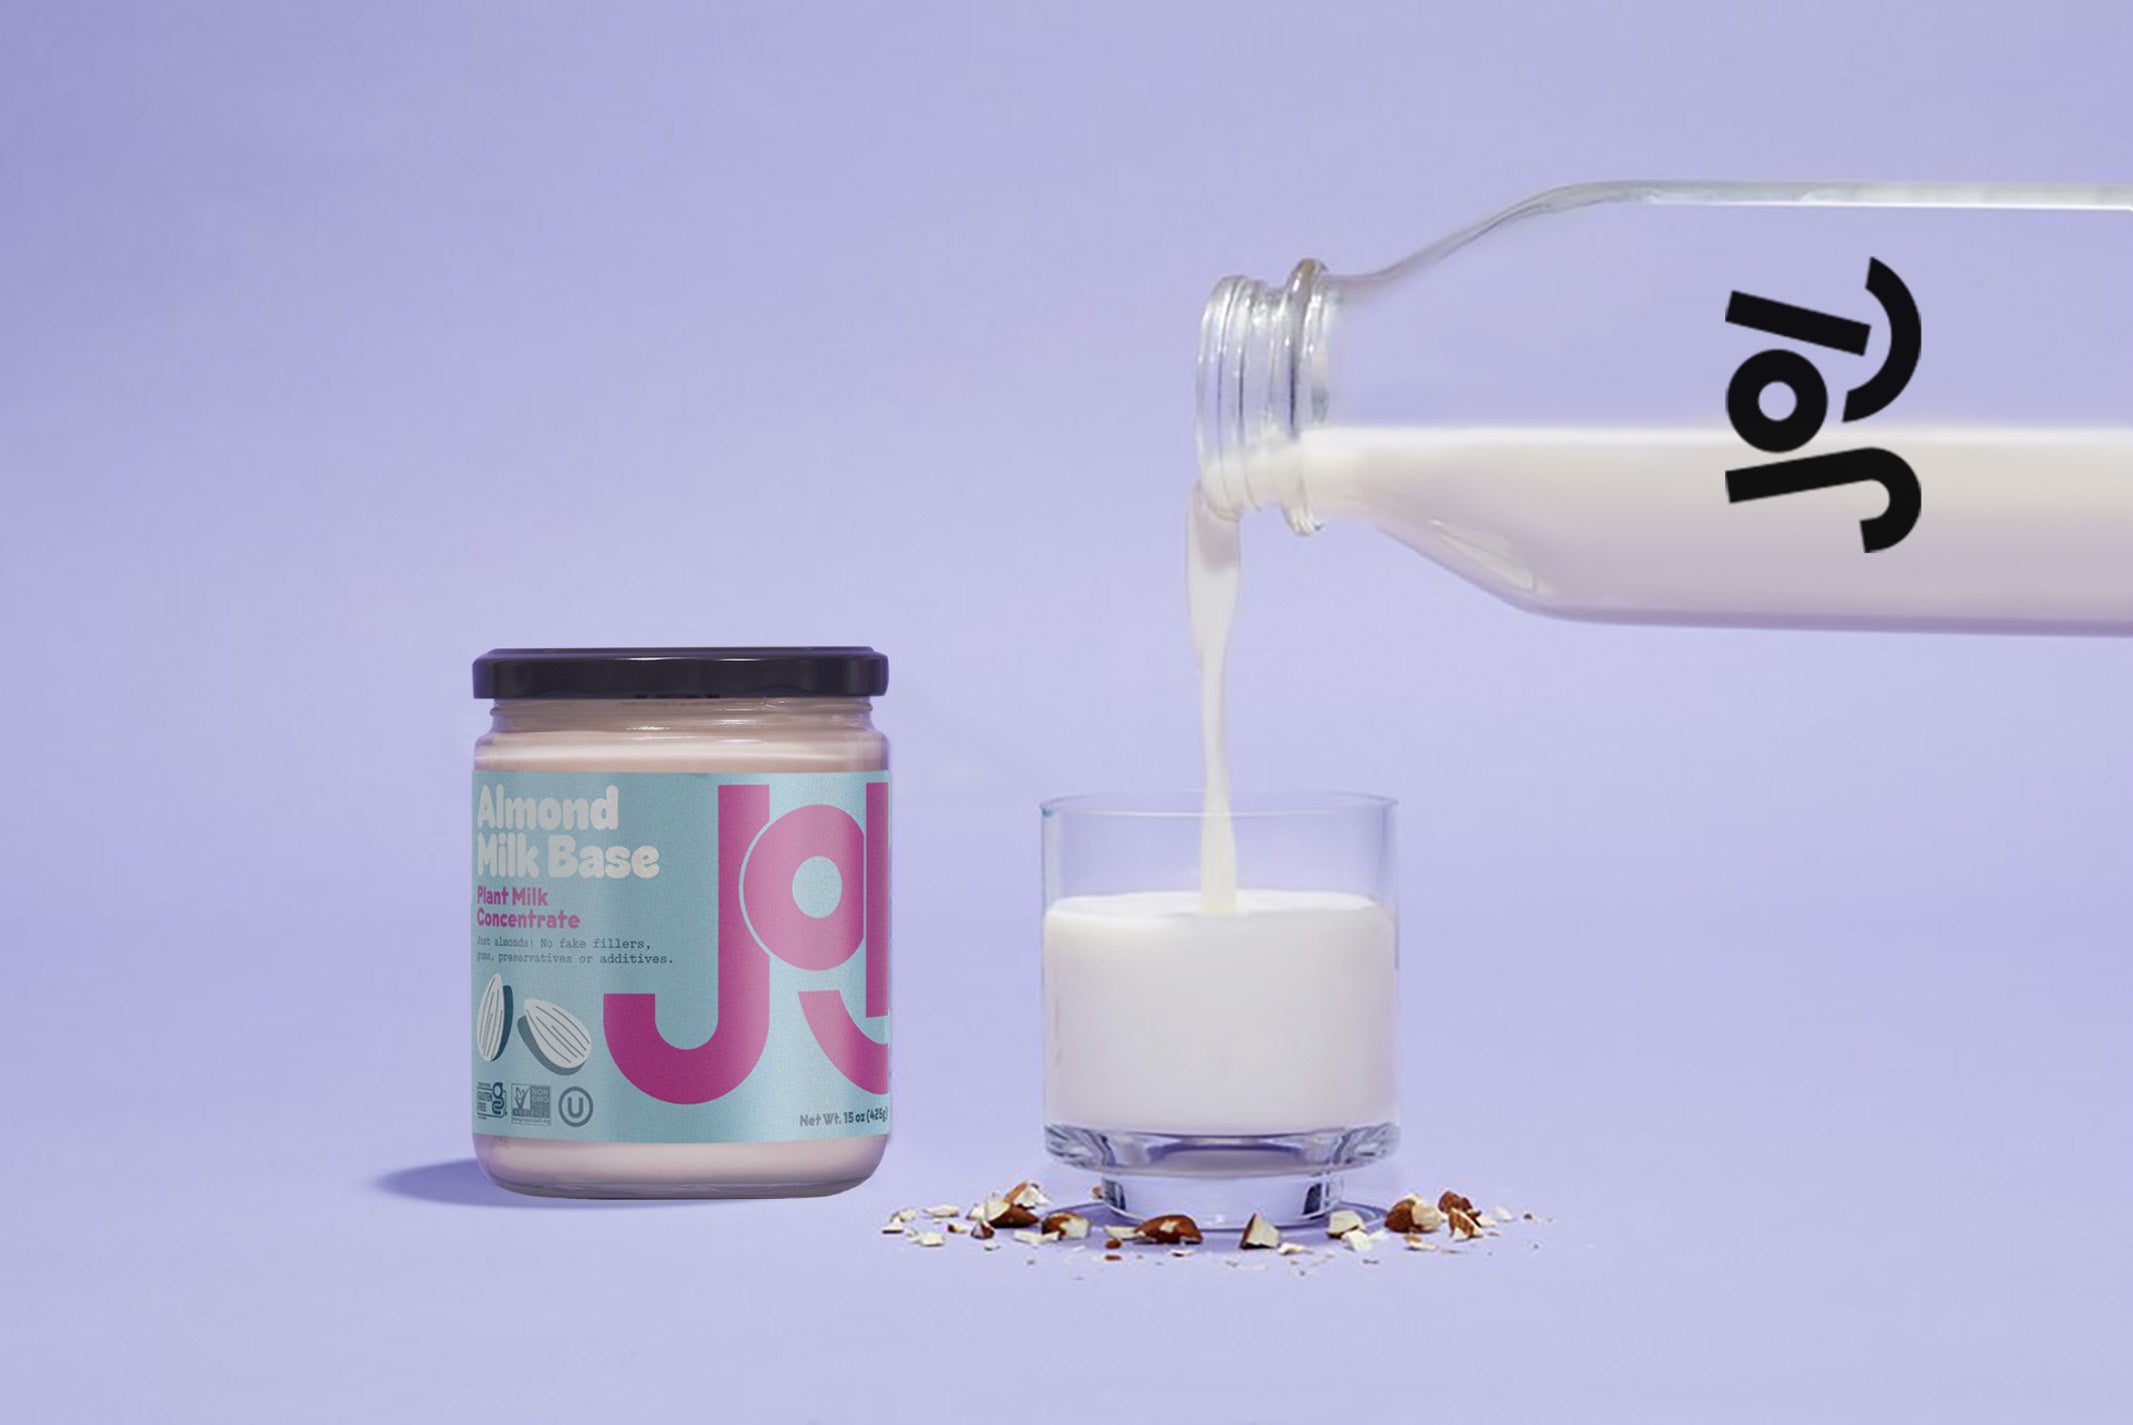 JOI Classic Almond Milk: Creamy, Delicious, Cost-Effective, and Time-Saving Homemade Milk Alternative Made with Just One Ingredient